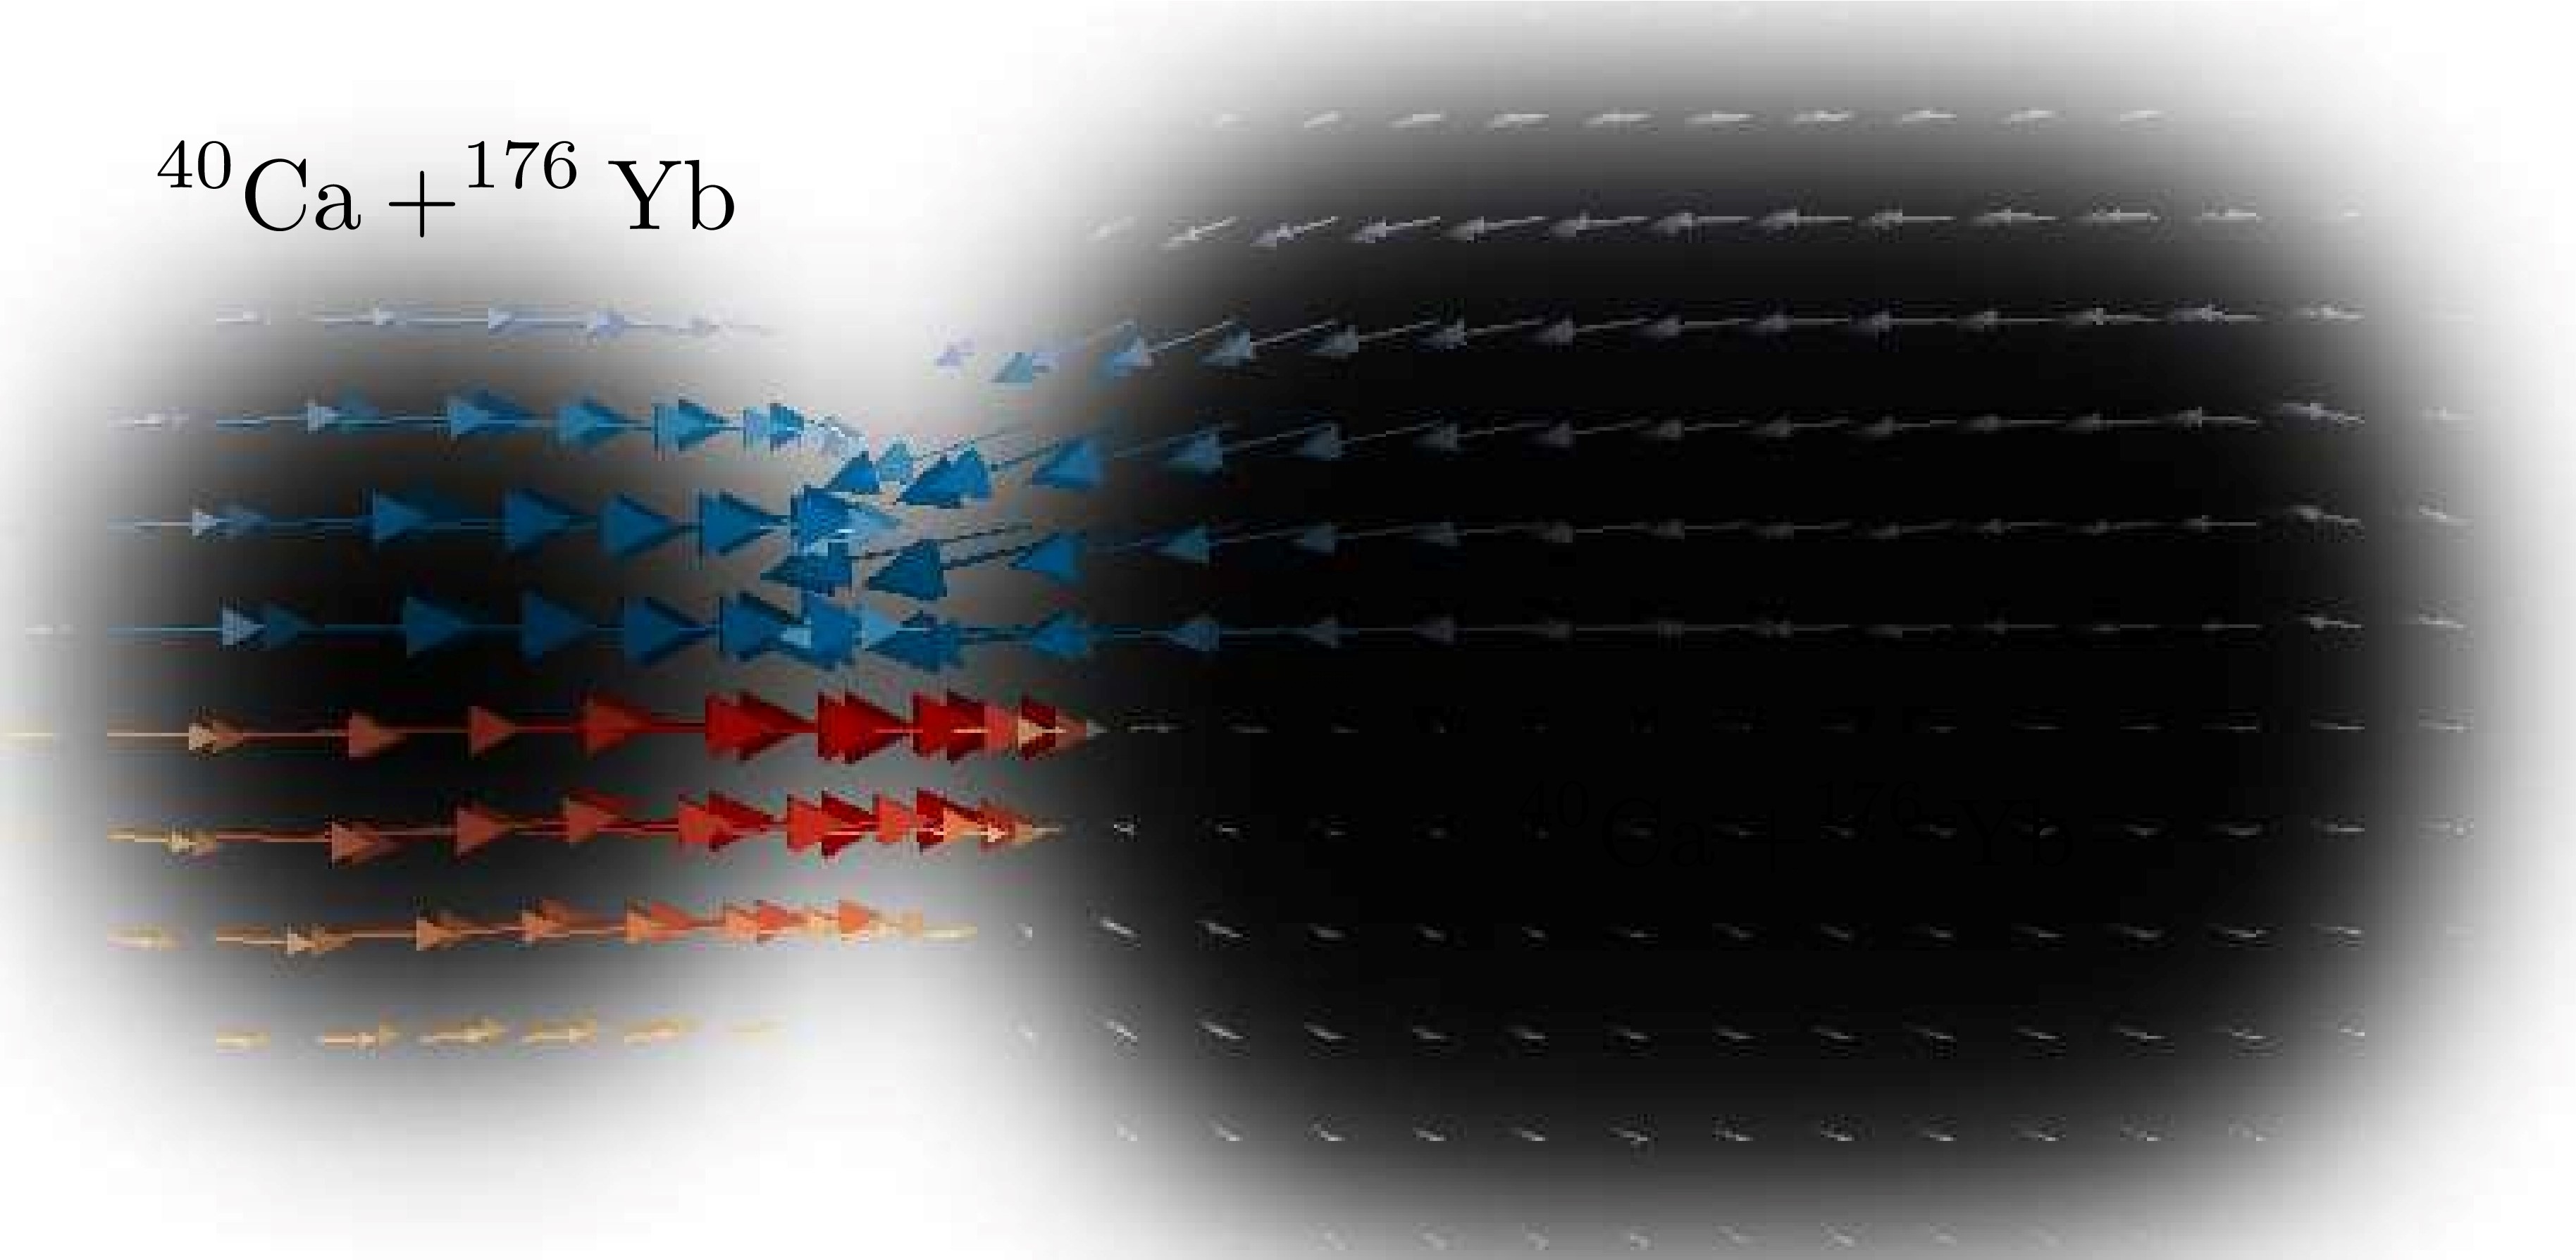 Shaded outlines of calcium-40 and ytterbium-176 nuclei (40Ca+176Yb) as they collide, leading to fusion, with nucleon currents for neutrons in blue and protons in red. The net neutron flow is from 176Yb to 40Ca and the proton flow is the opposite. 